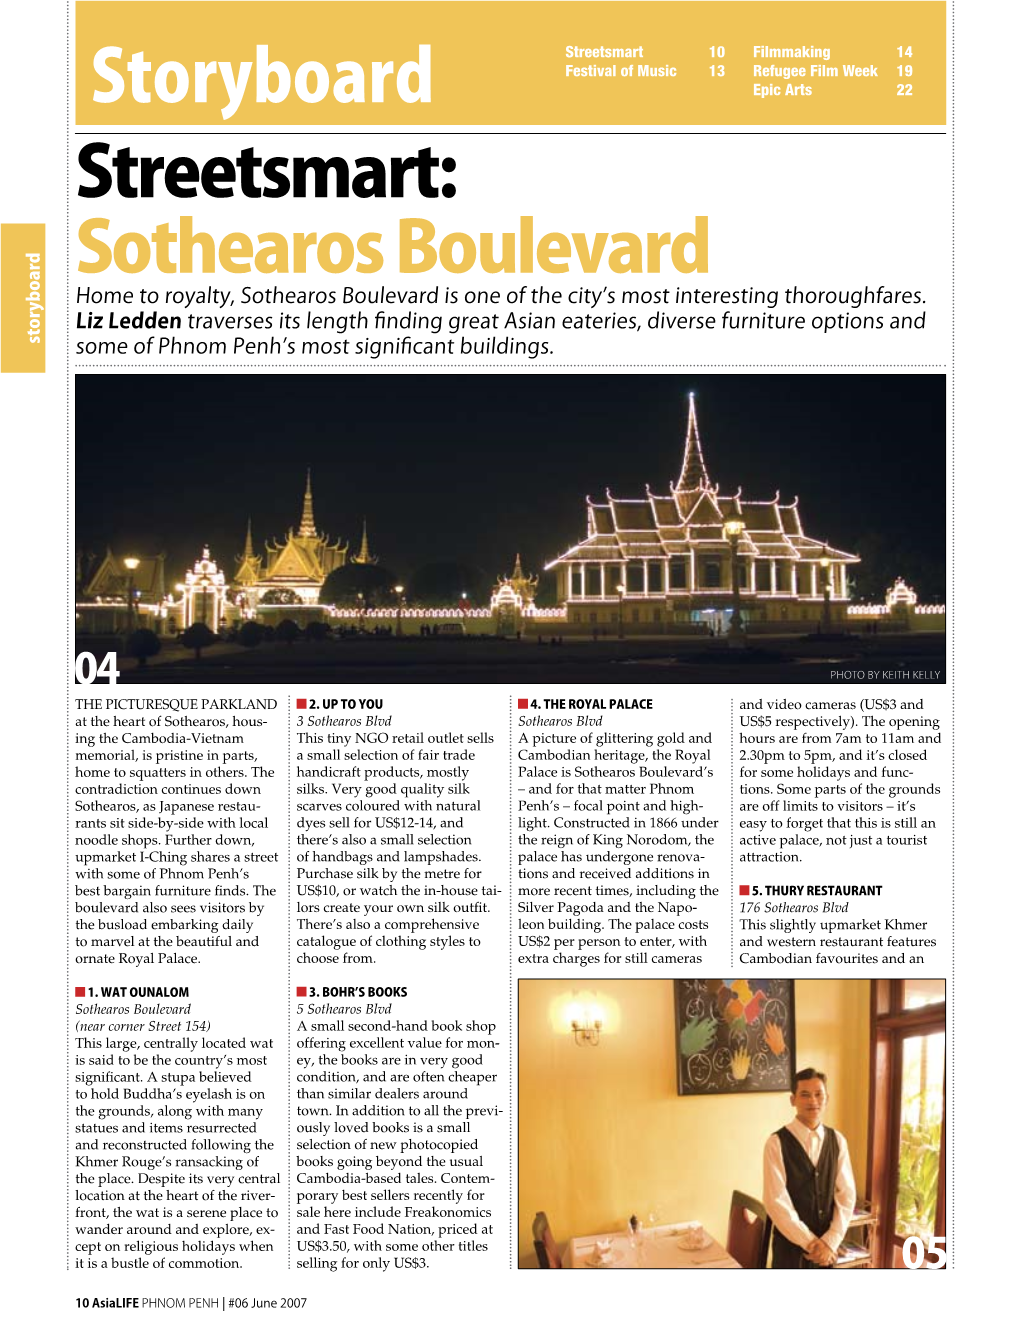 Storyboard Epic Arts 22 Streetsmart: Sothearos Boulevard Home to Royalty, Sothearos Boulevard Is One of the City’S Most Interesting Thoroughfares